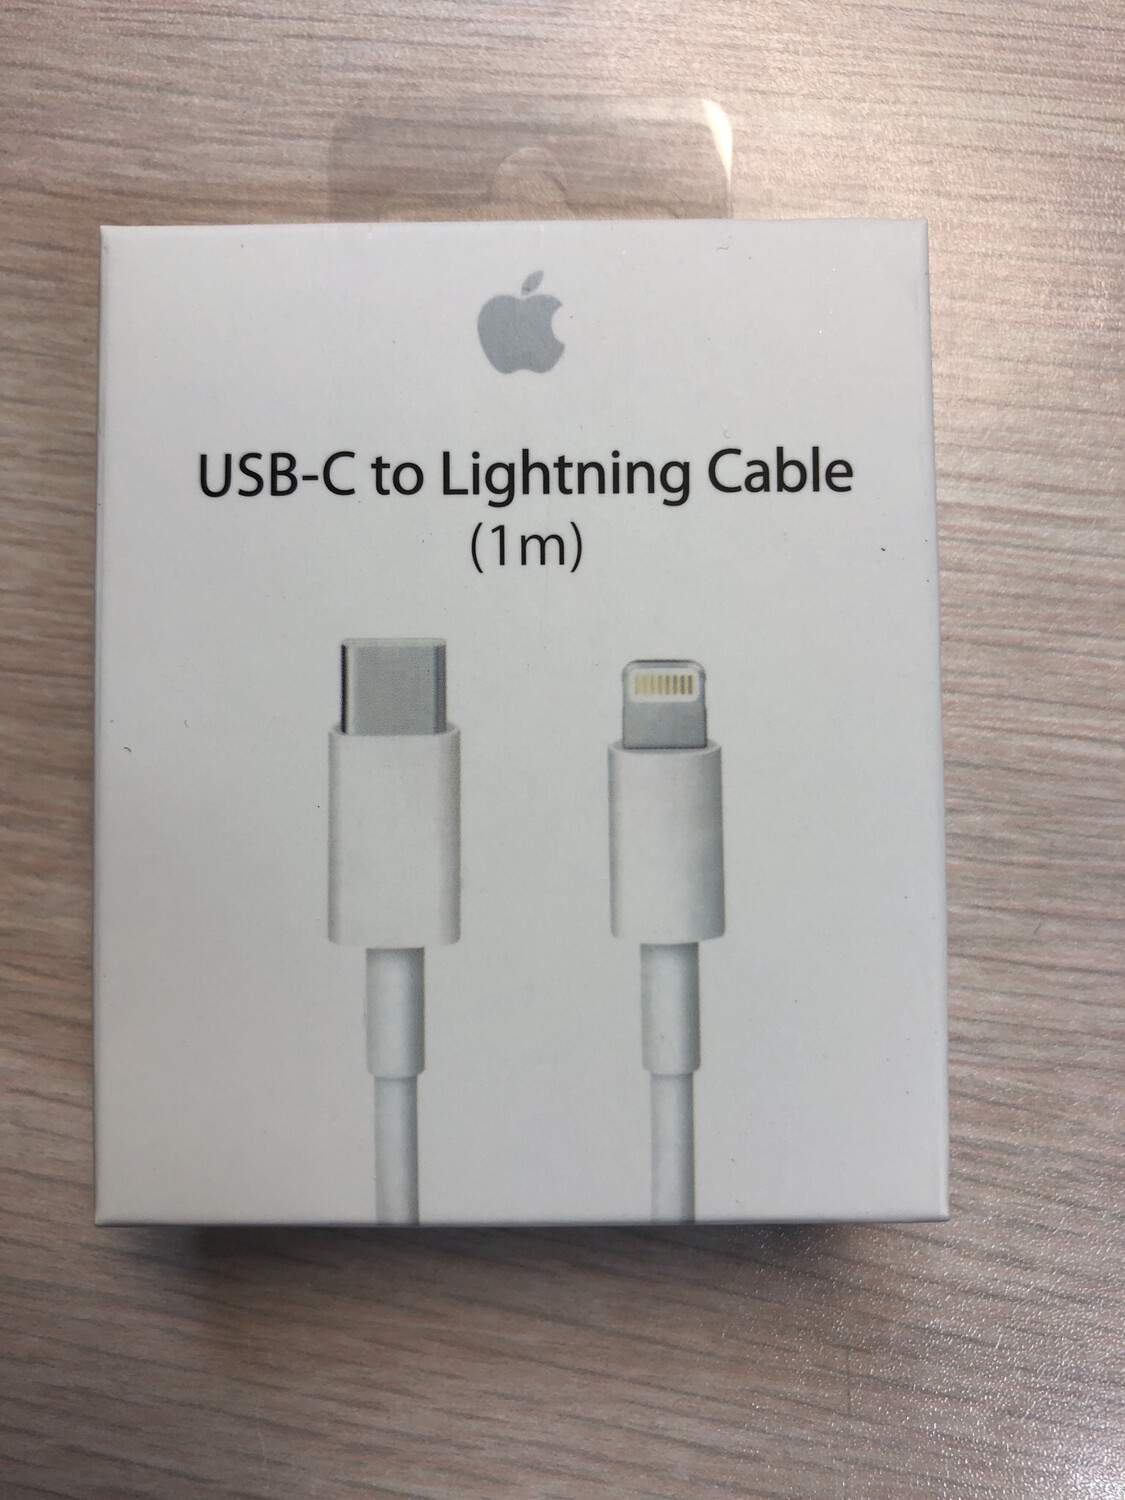 USB -C to Lightning Cable (1m)